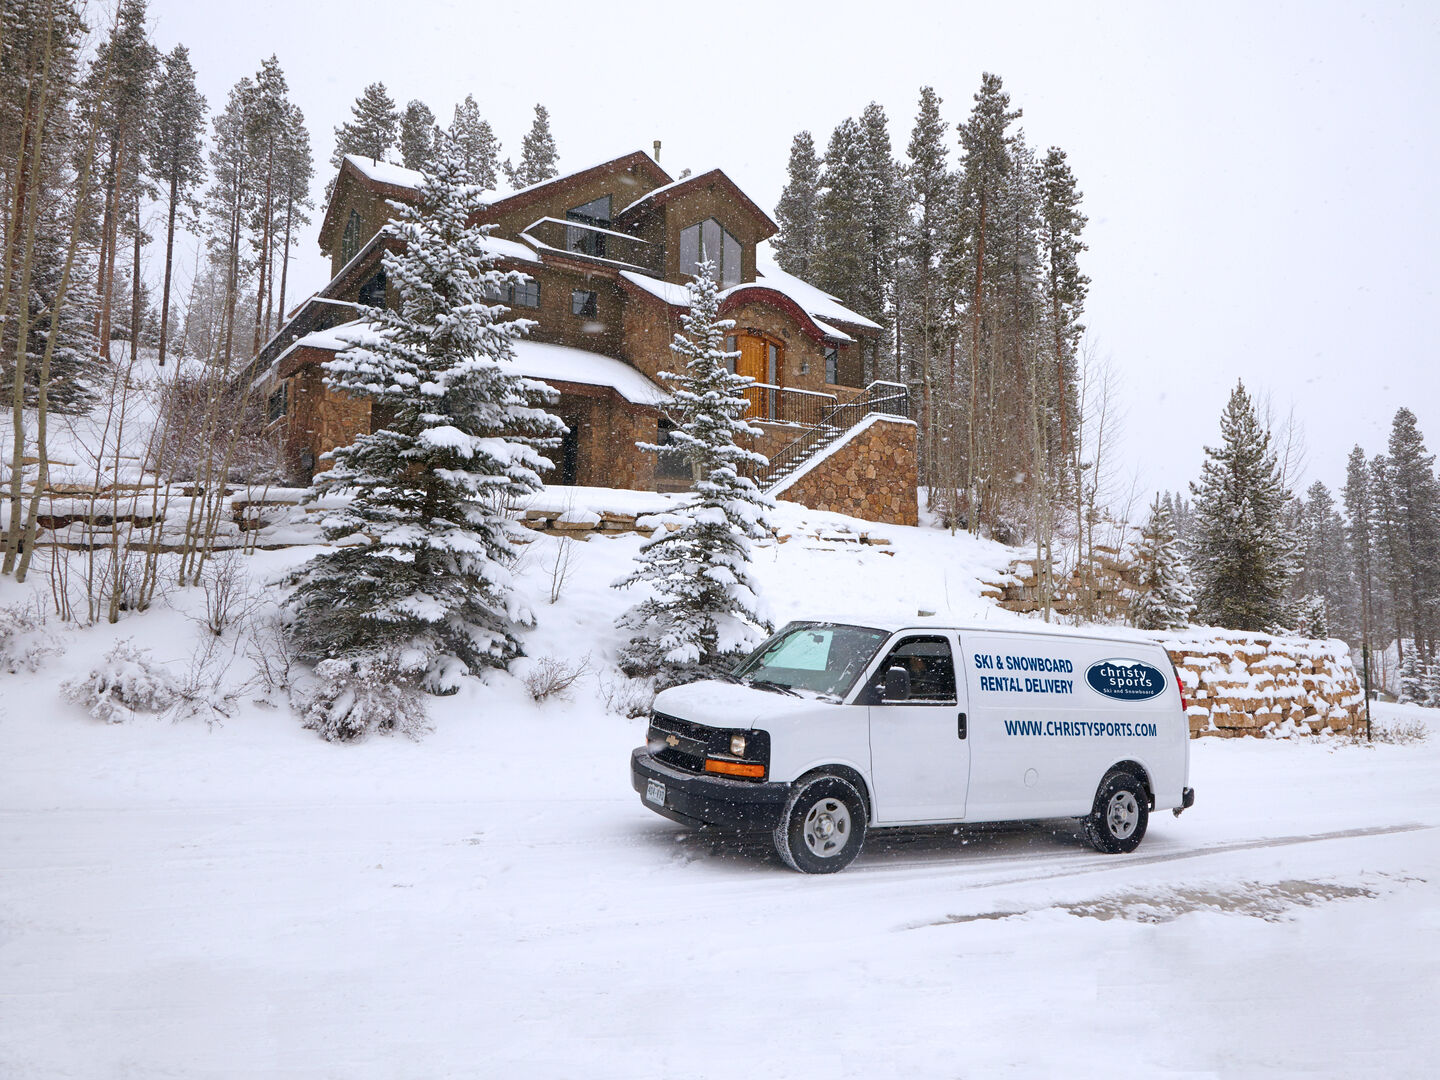 CHRISTY SPORTS SKI AND SNOWBOARD RENTAL DELIVERY IN CRESTED BUTTE